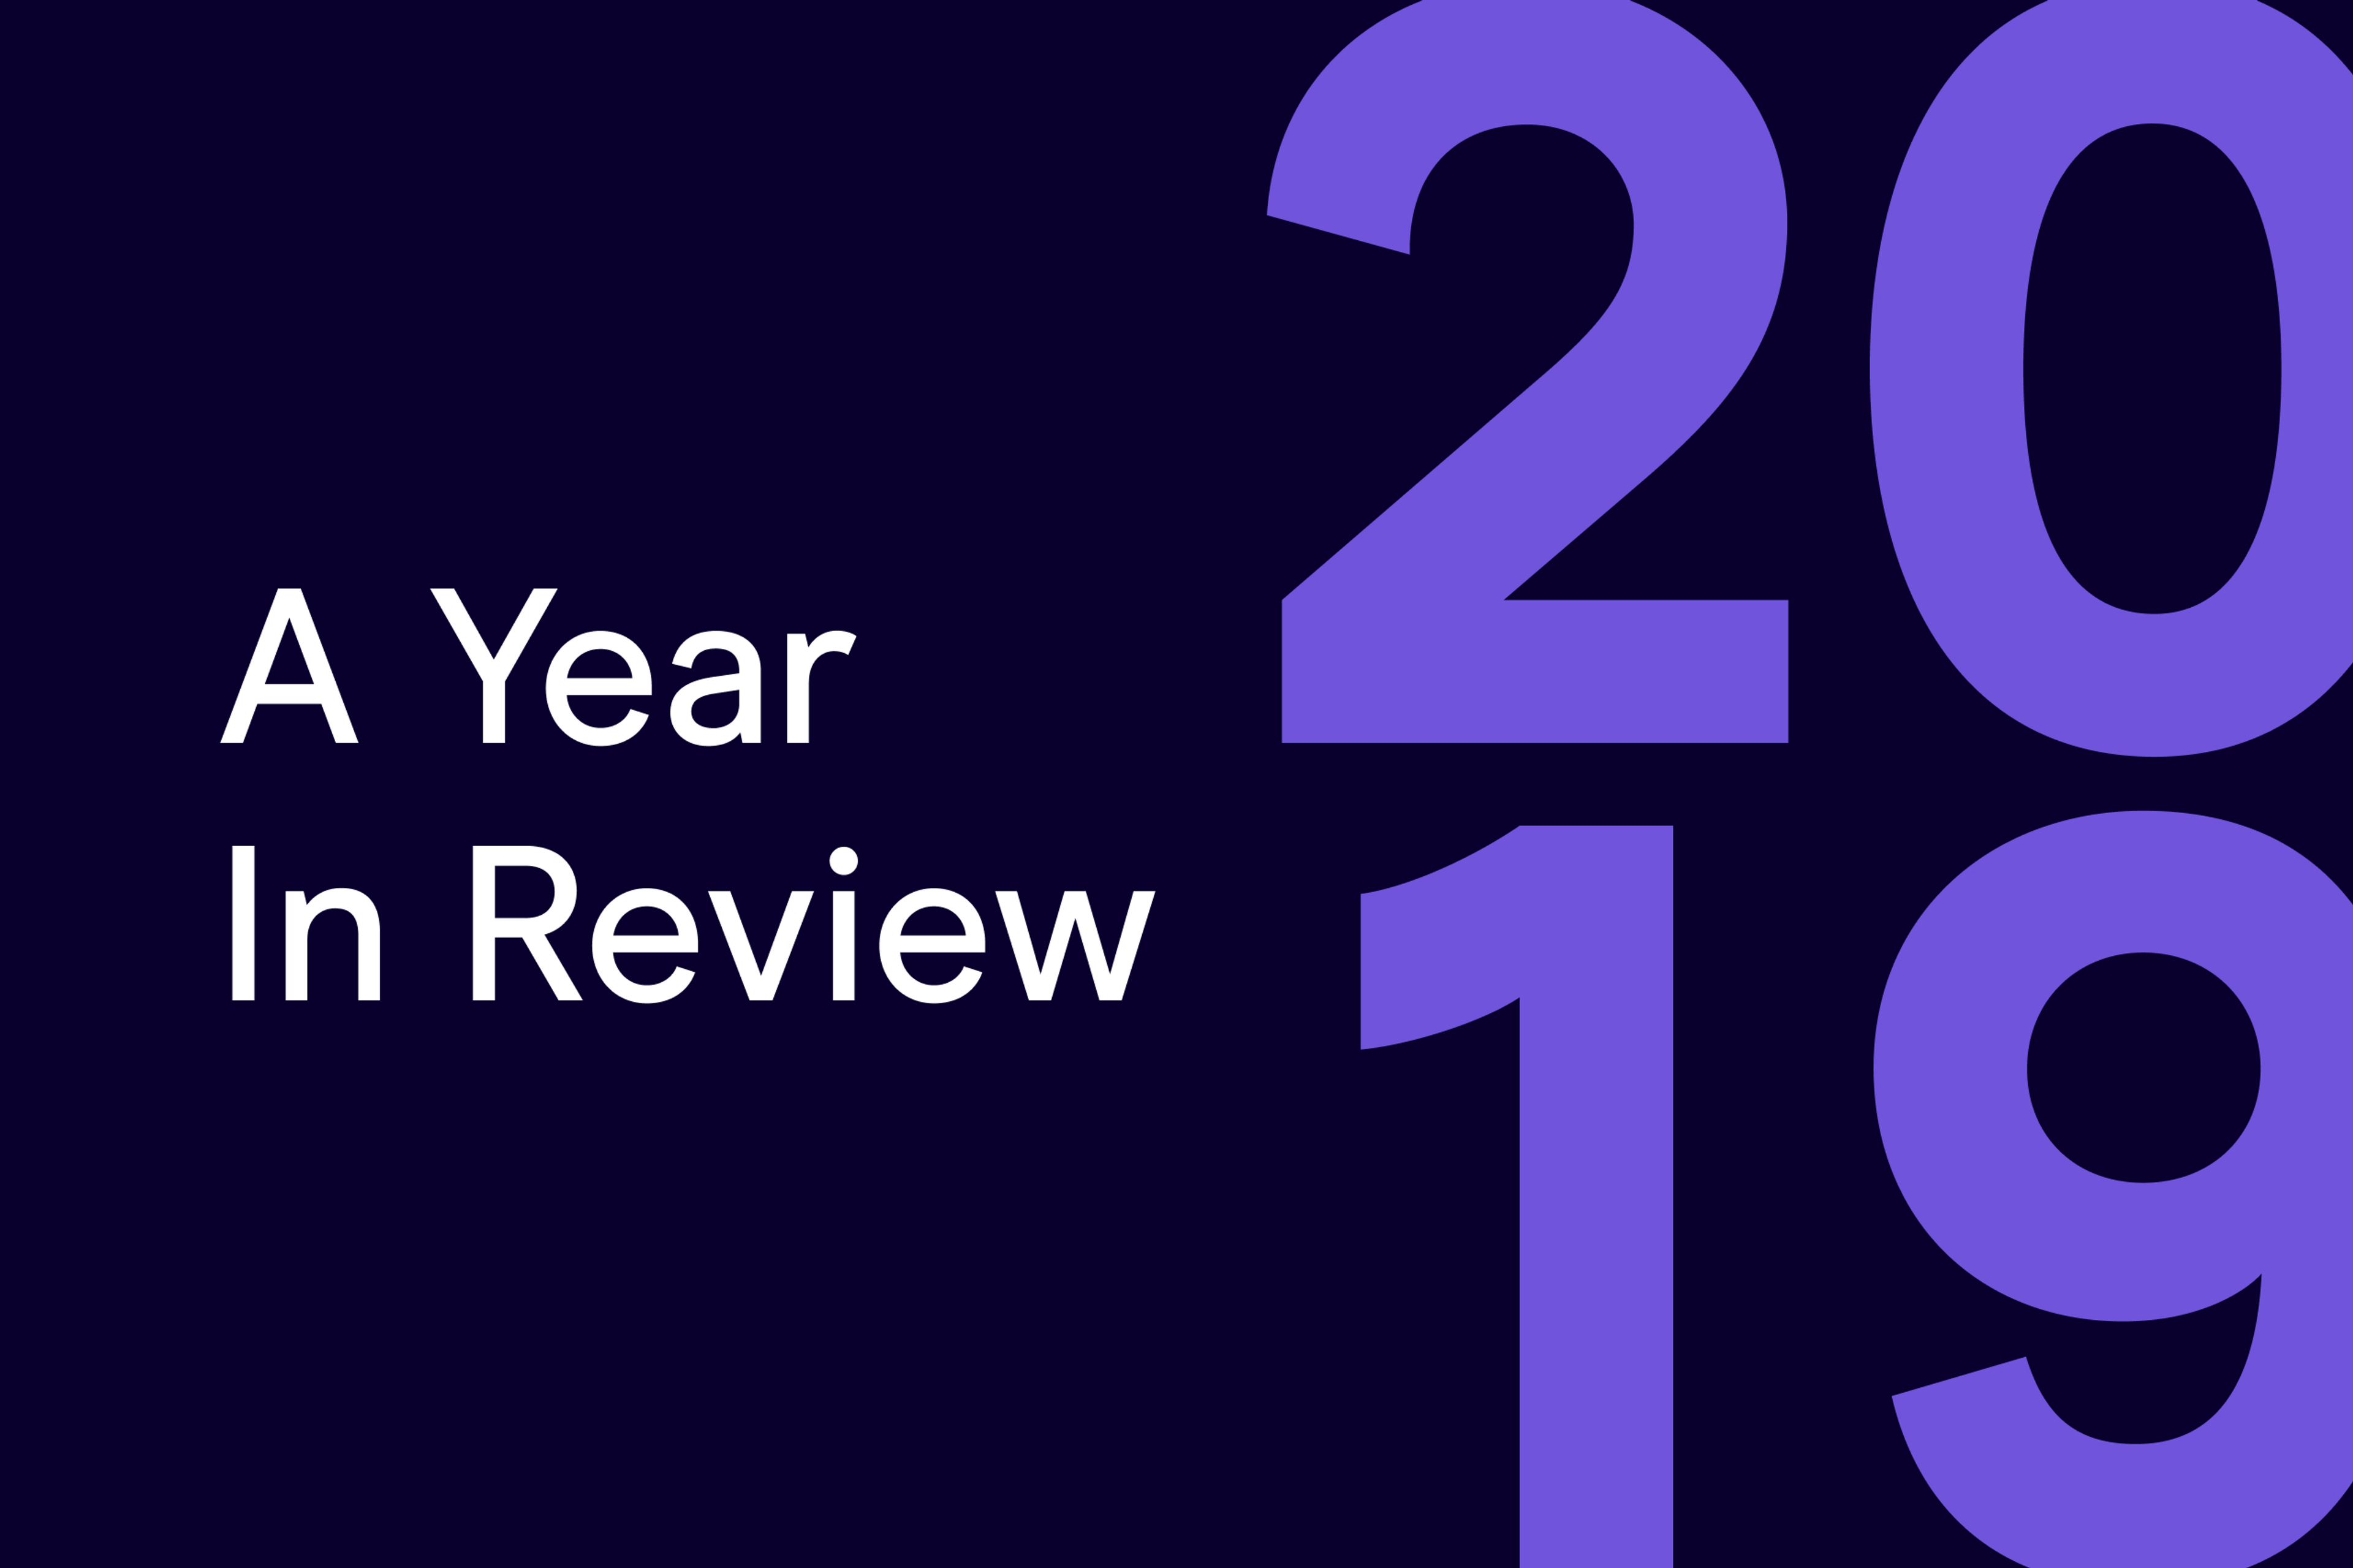 Zego 2019 a year in review